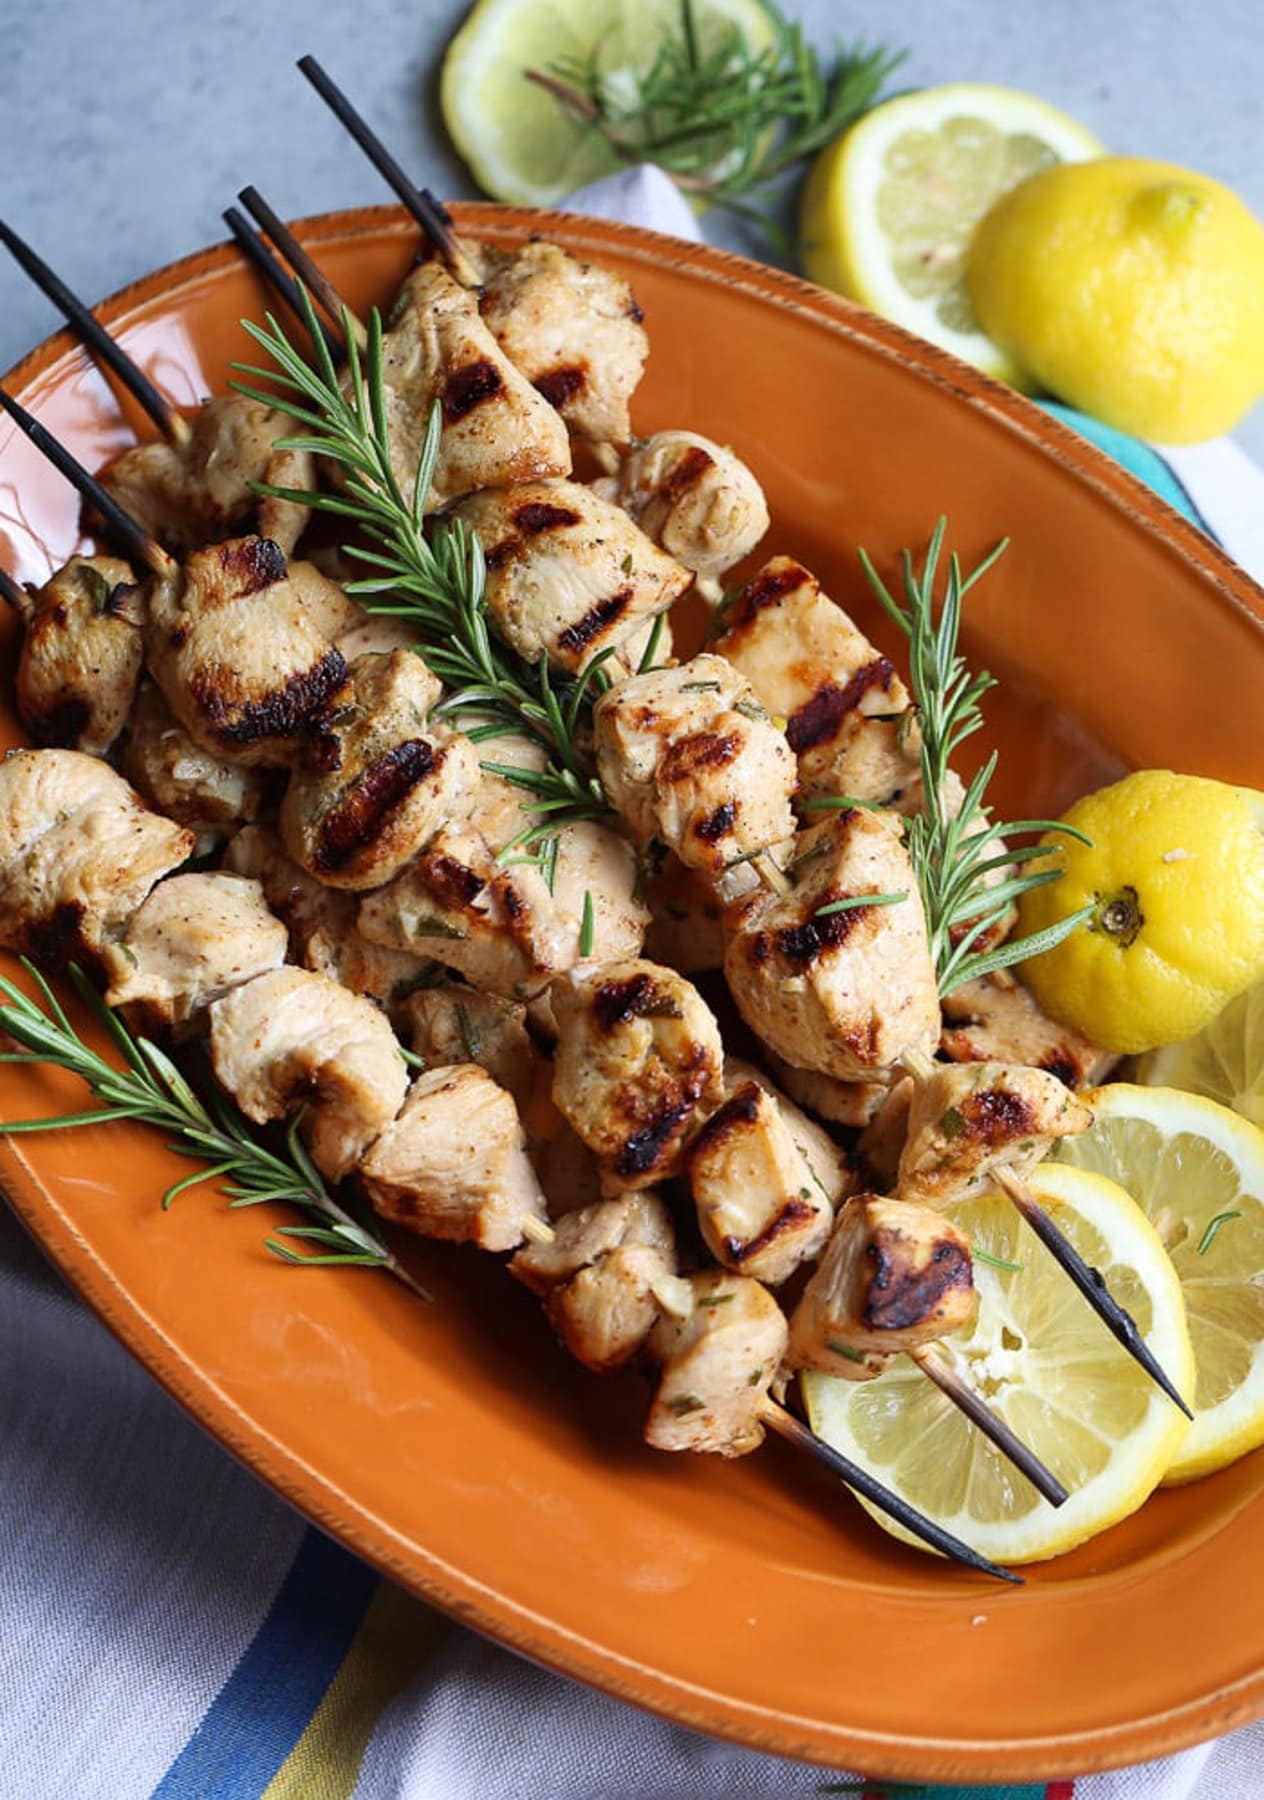 Grilled Chicken on skewers with rosemary sprigs and lemon slices.